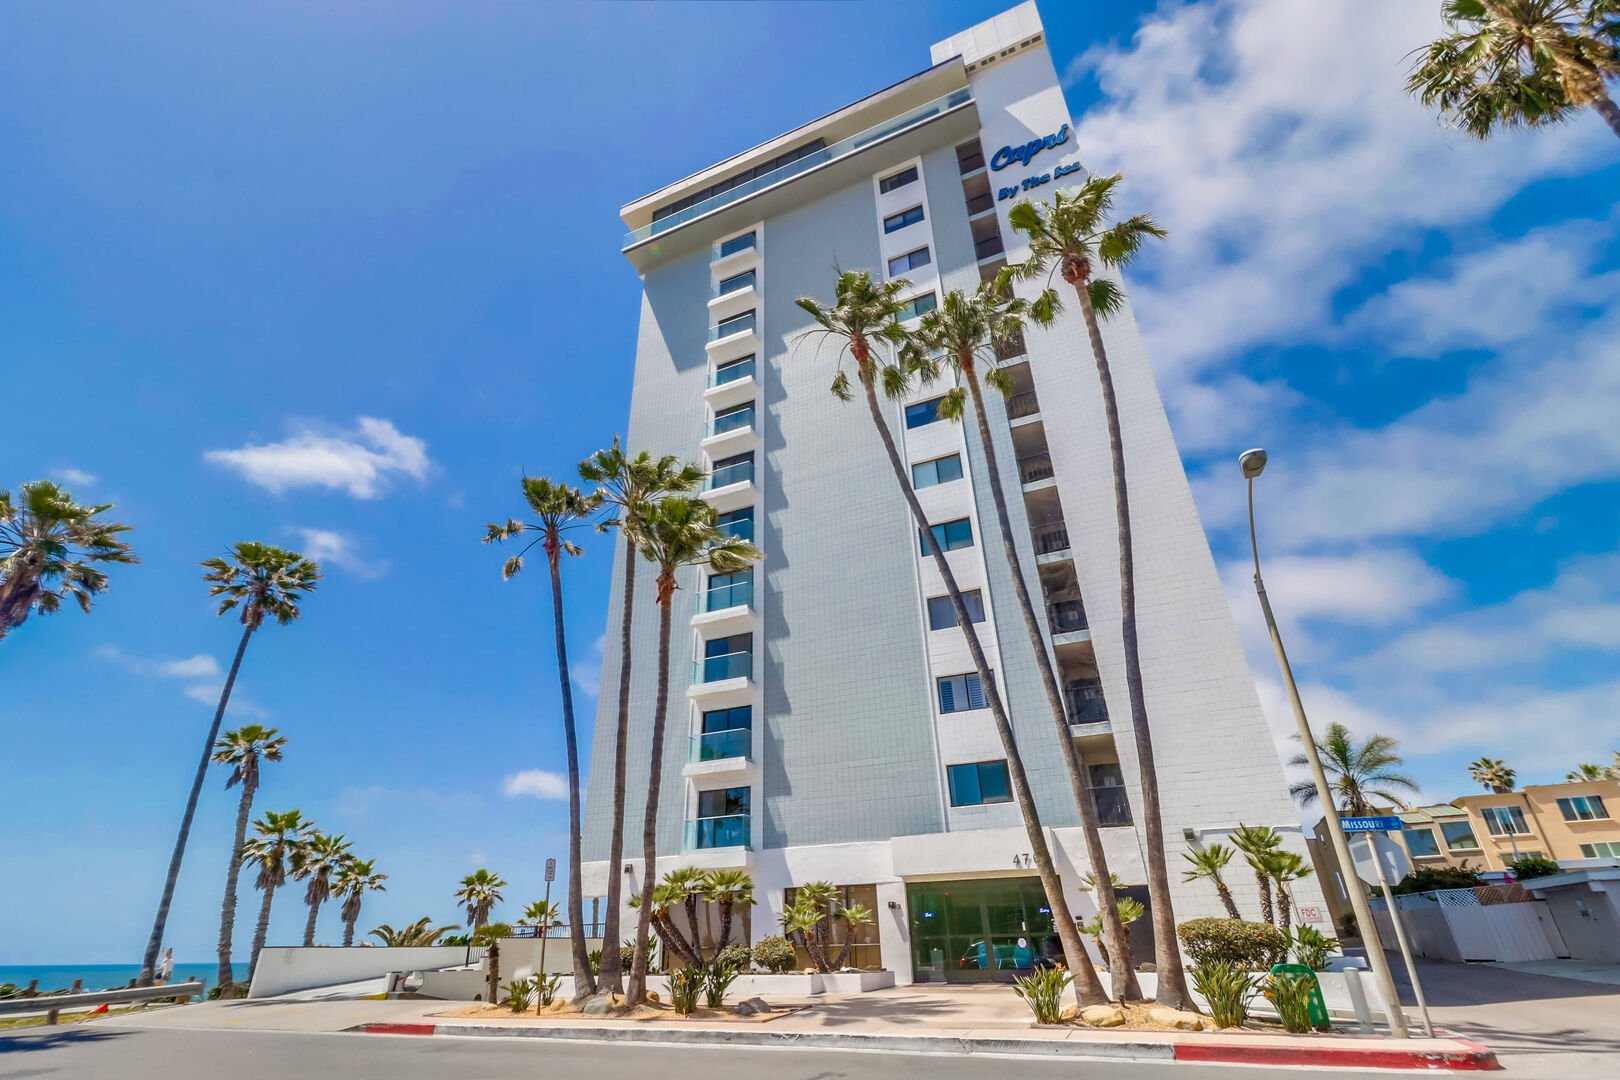 Largest high-rise in Pacific Beach! This location is hard to beat, and with amenities that set it apart from any other complex in the area!